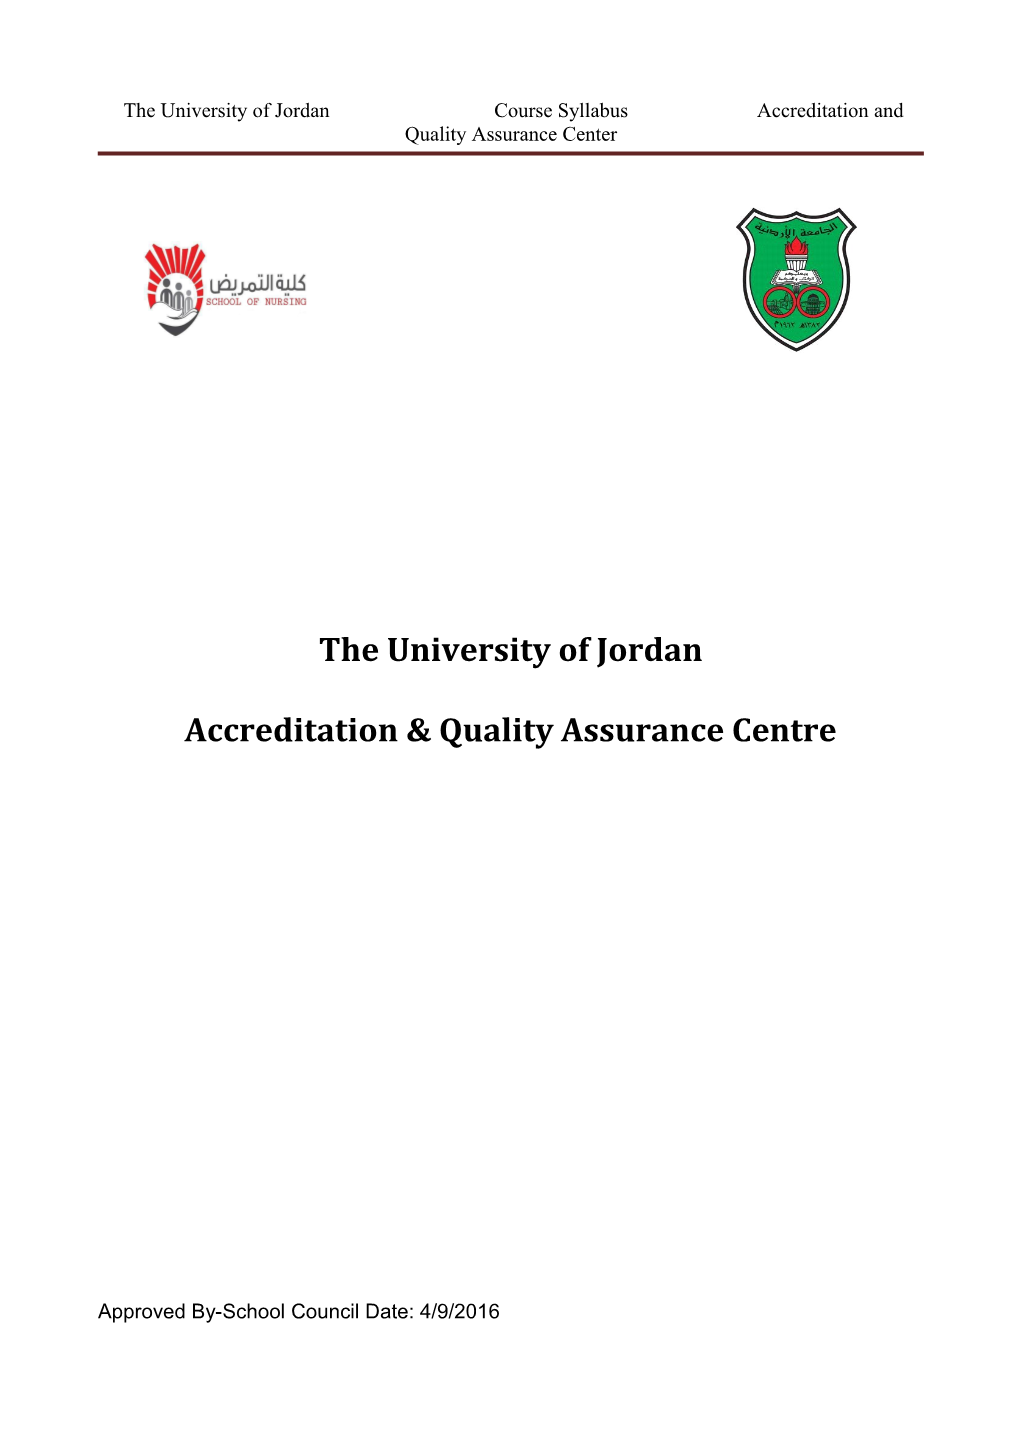 The University of Jordan Course Syllabus Accreditation and Quality Assurance Center